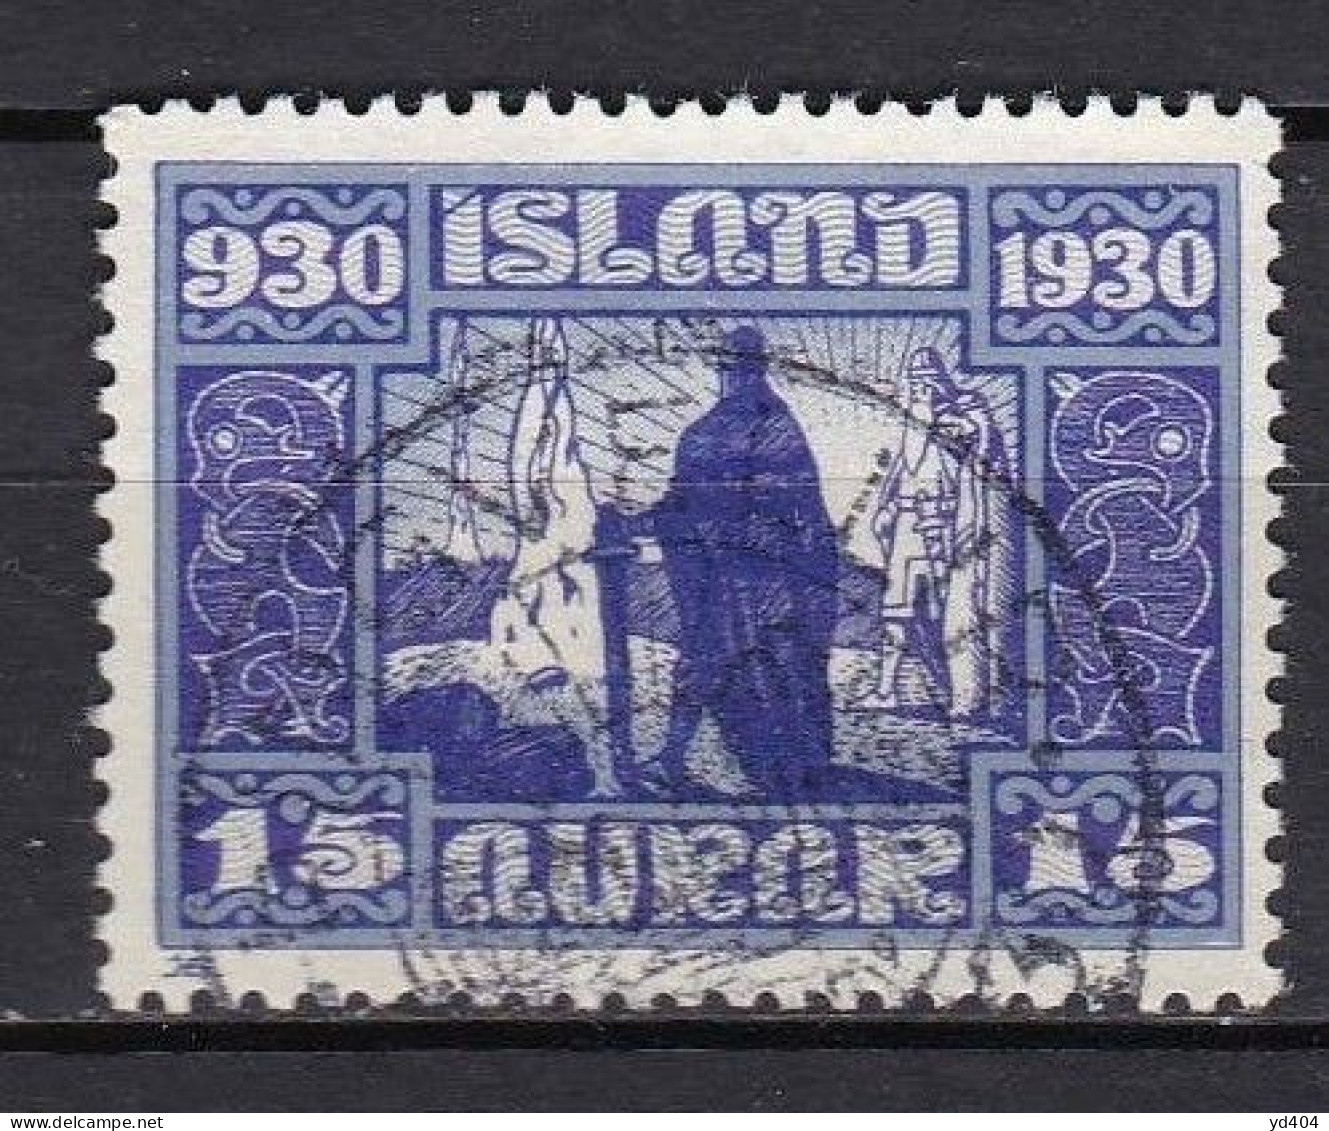 IS020E – ISLANDE – ICELAND – 1930 – MILLENARY OF THE ALTHING – SG # 162 USED 11,50 € - Oblitérés